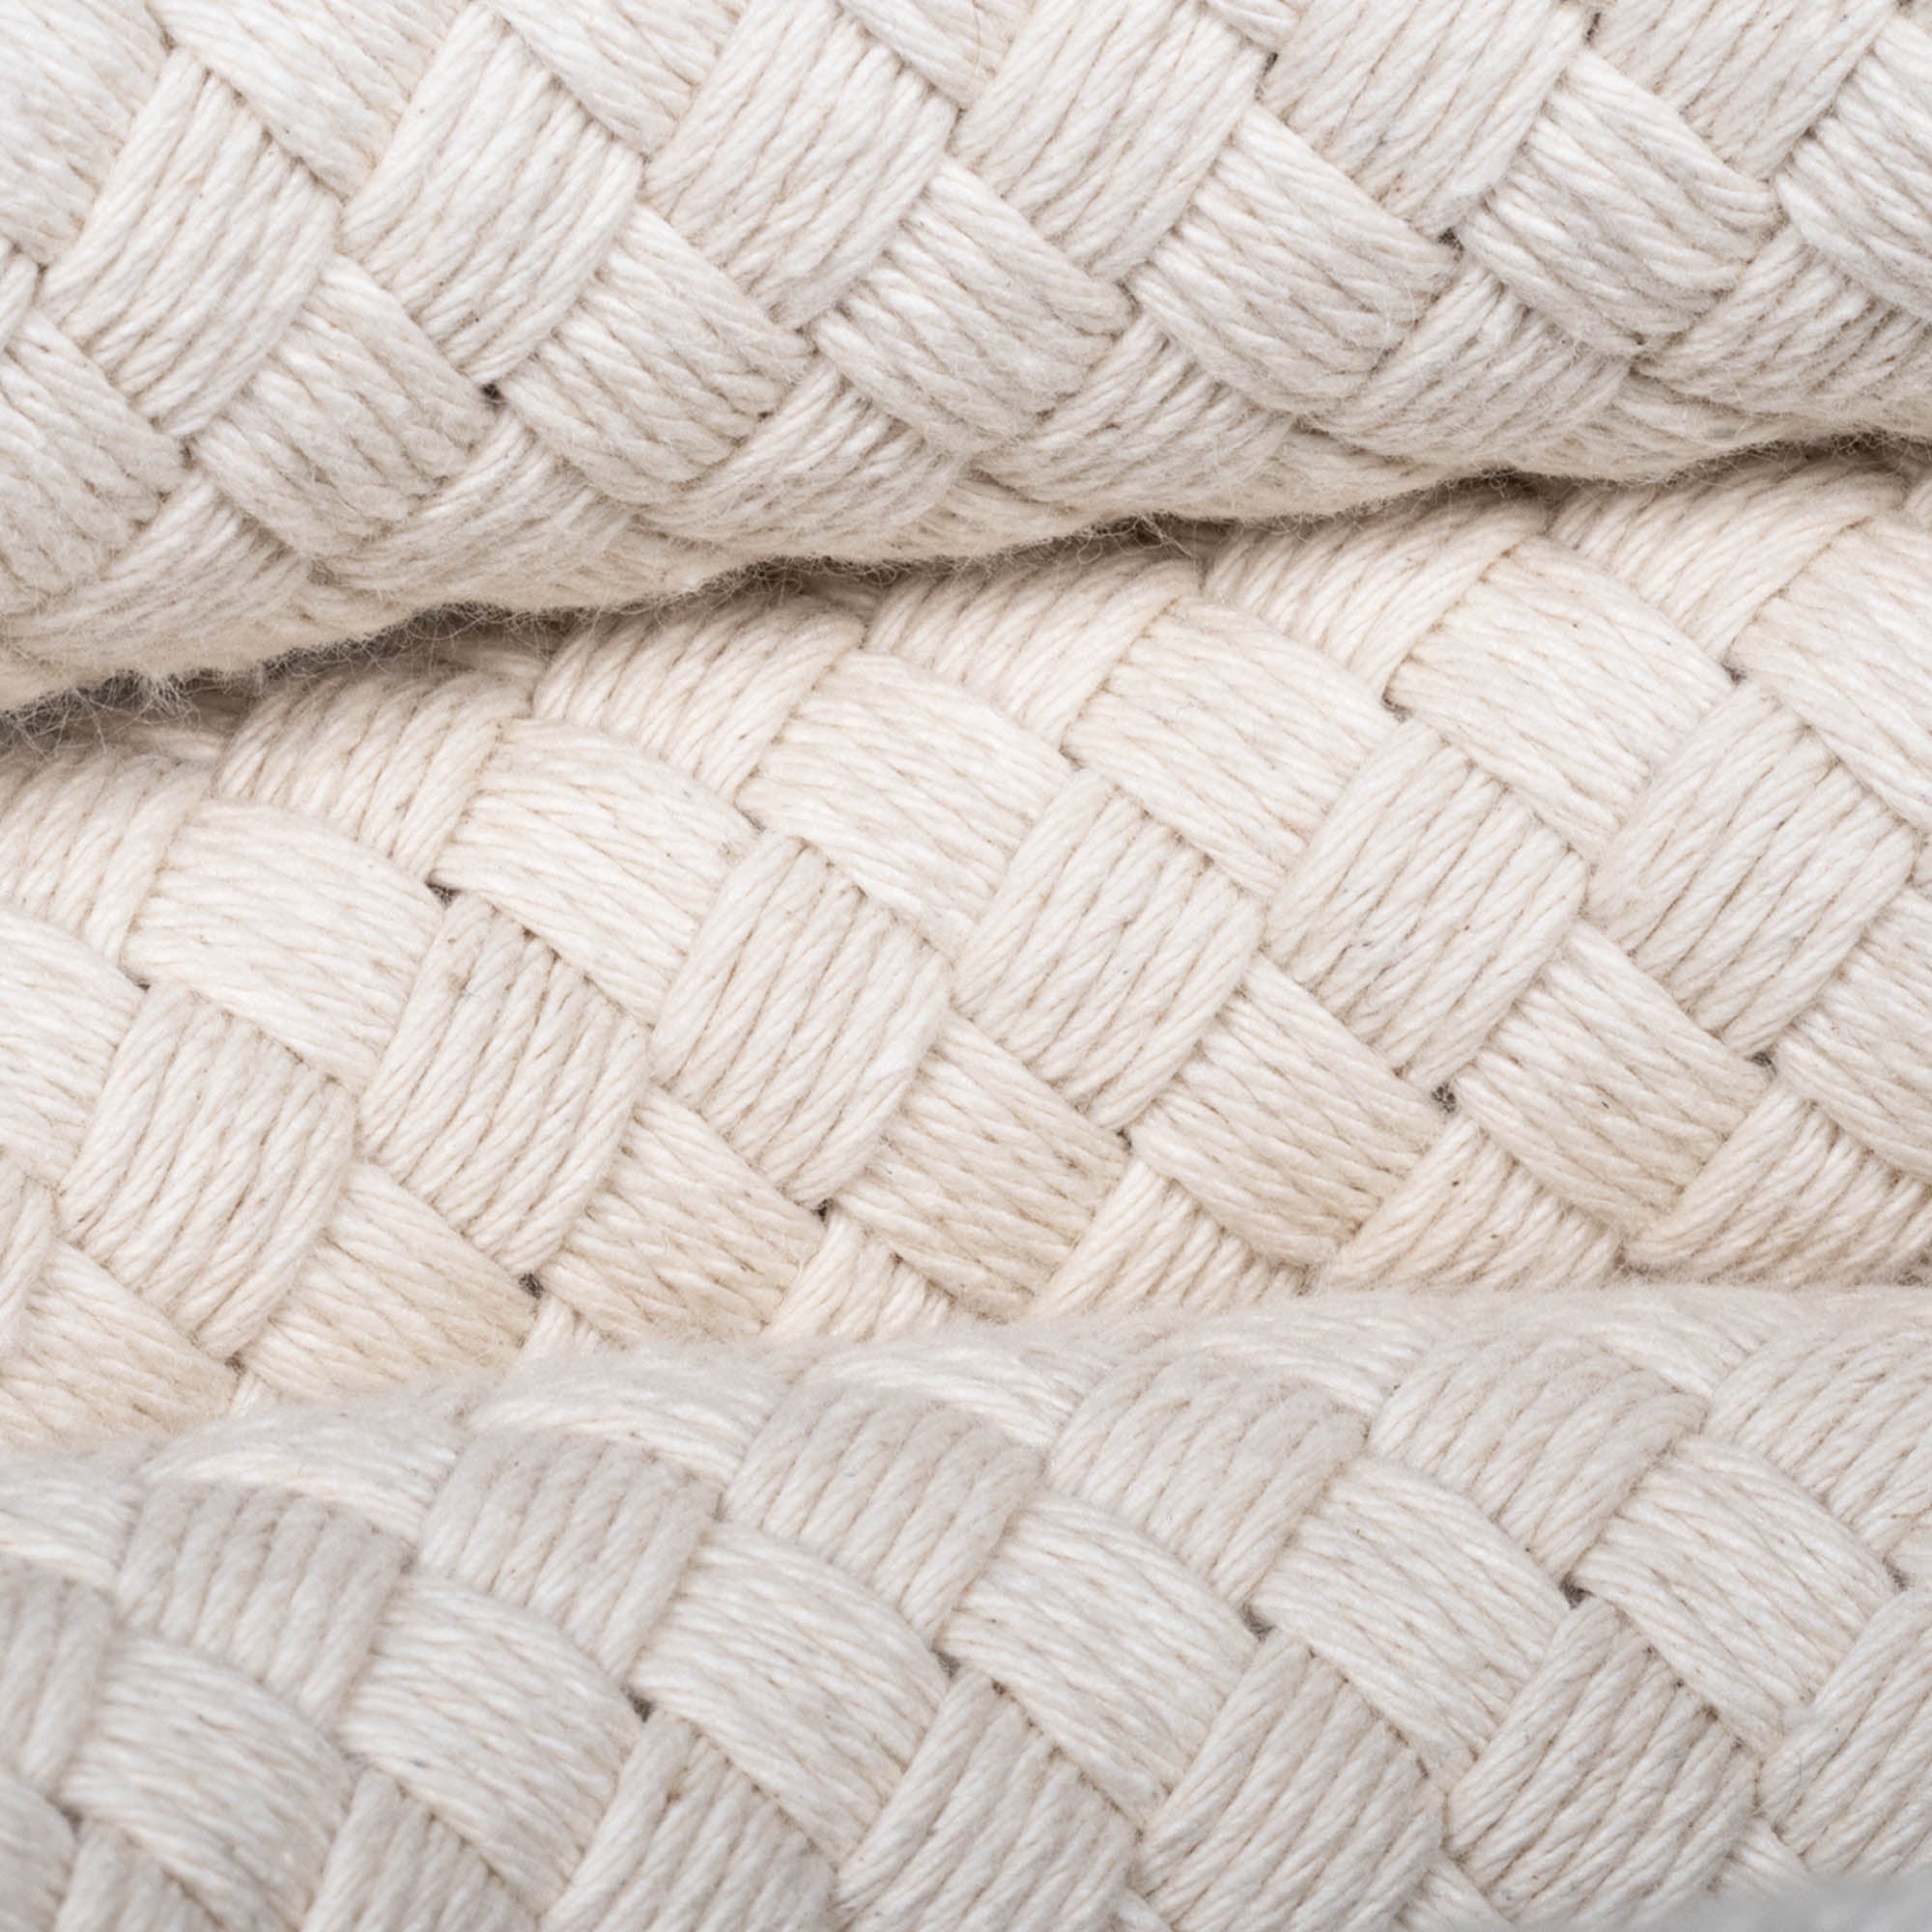 Close up rope texture